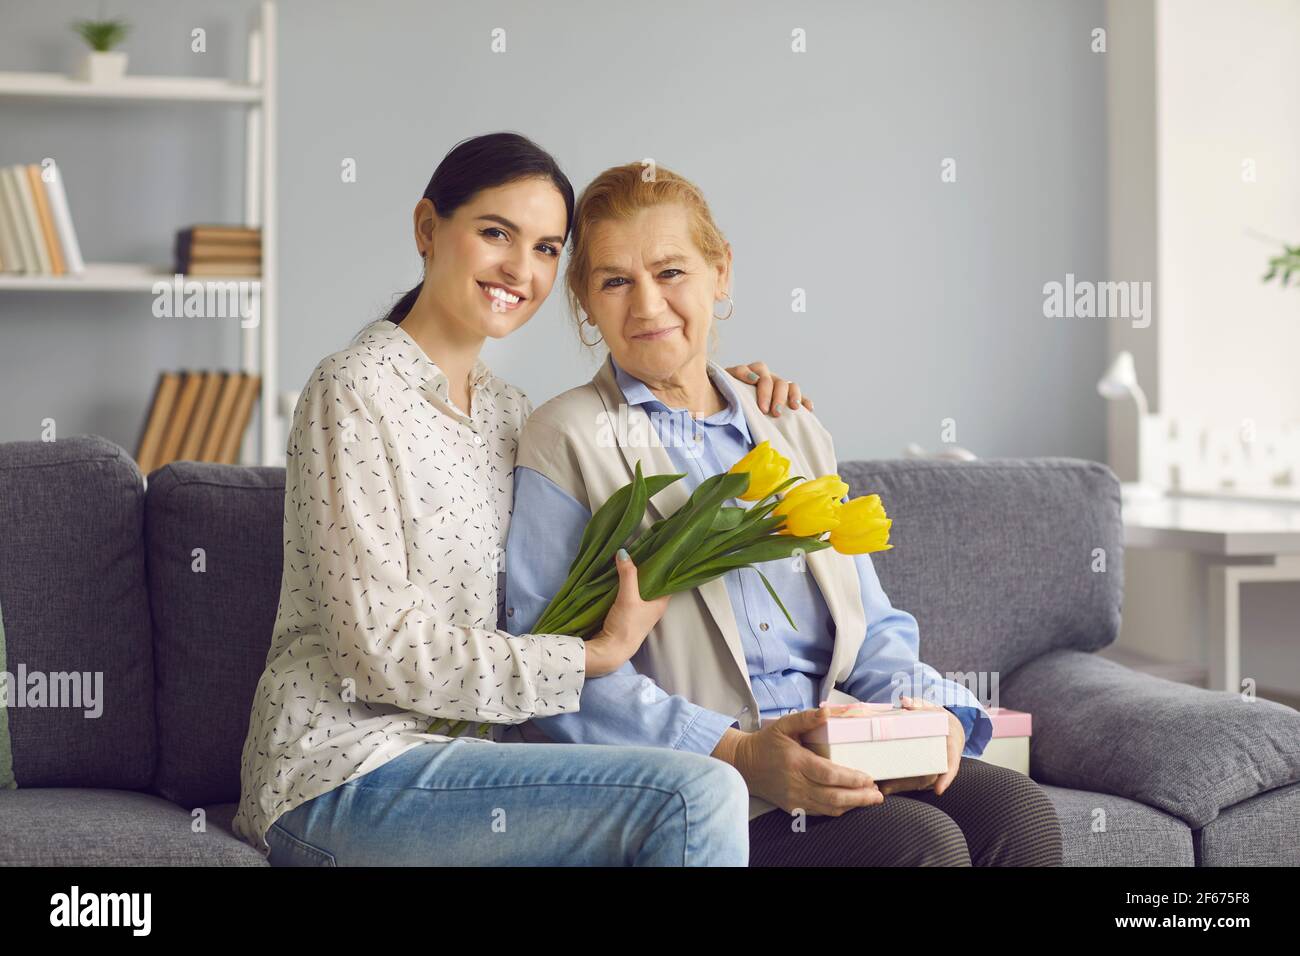 Portrait of young grownup daughter with flower embracing elderly mother Stock Photo